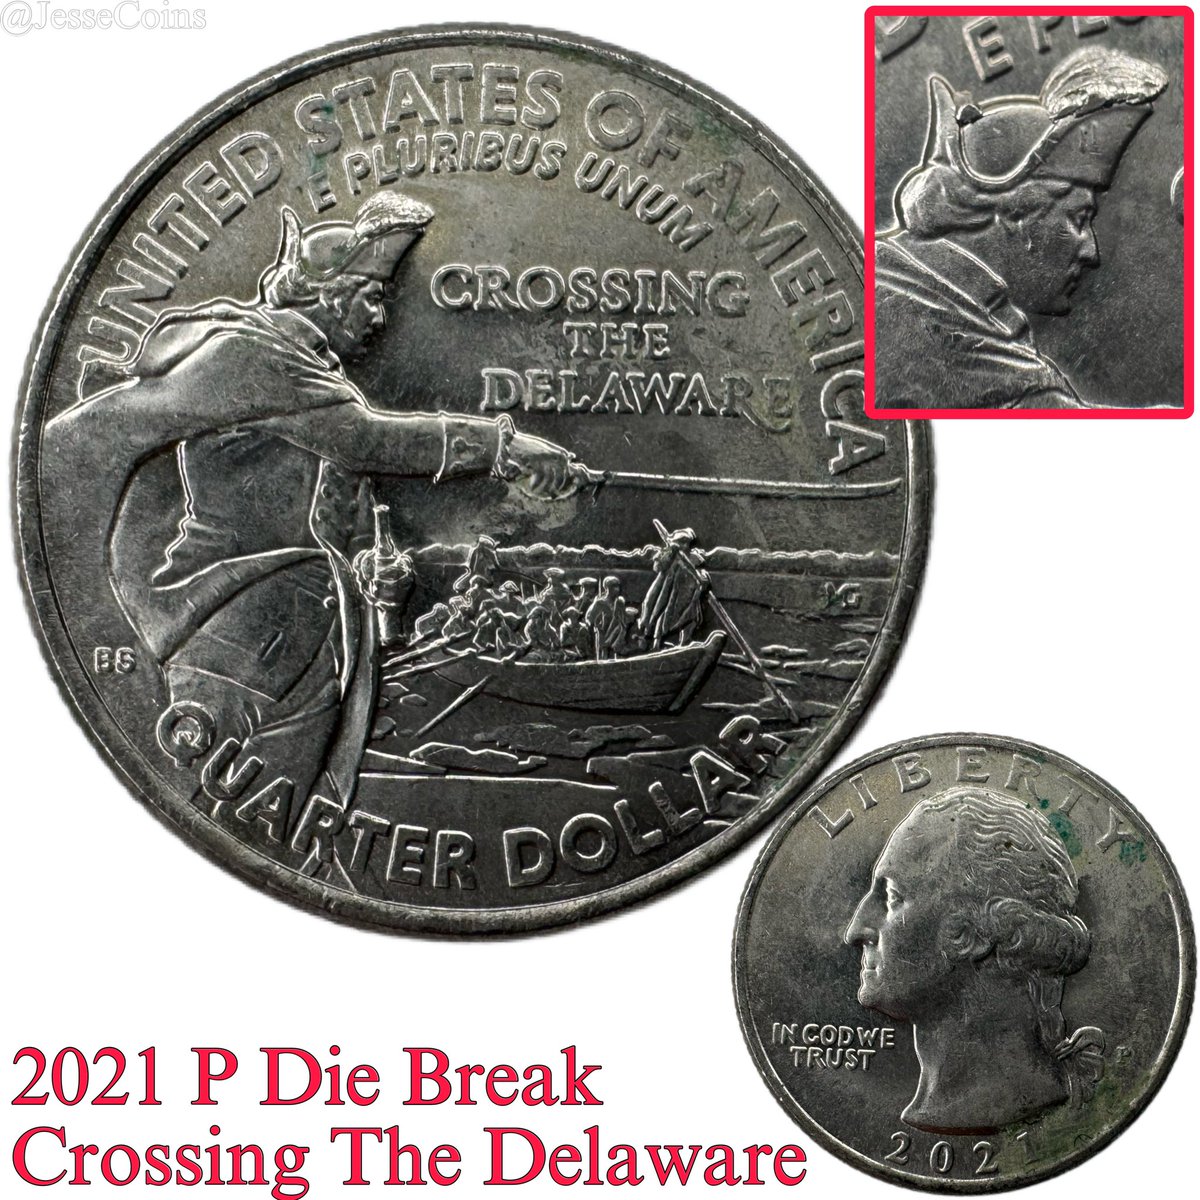 2021 P Crossing the Delaware Die Break!  Another fine example of a die break on General George Washington’s hat. This one looks like a massive feather in his hat. 
L

#crh #coinroll #coinrollhunting #coincollecting #coincollector #quarters #currency #currencycollection #fun